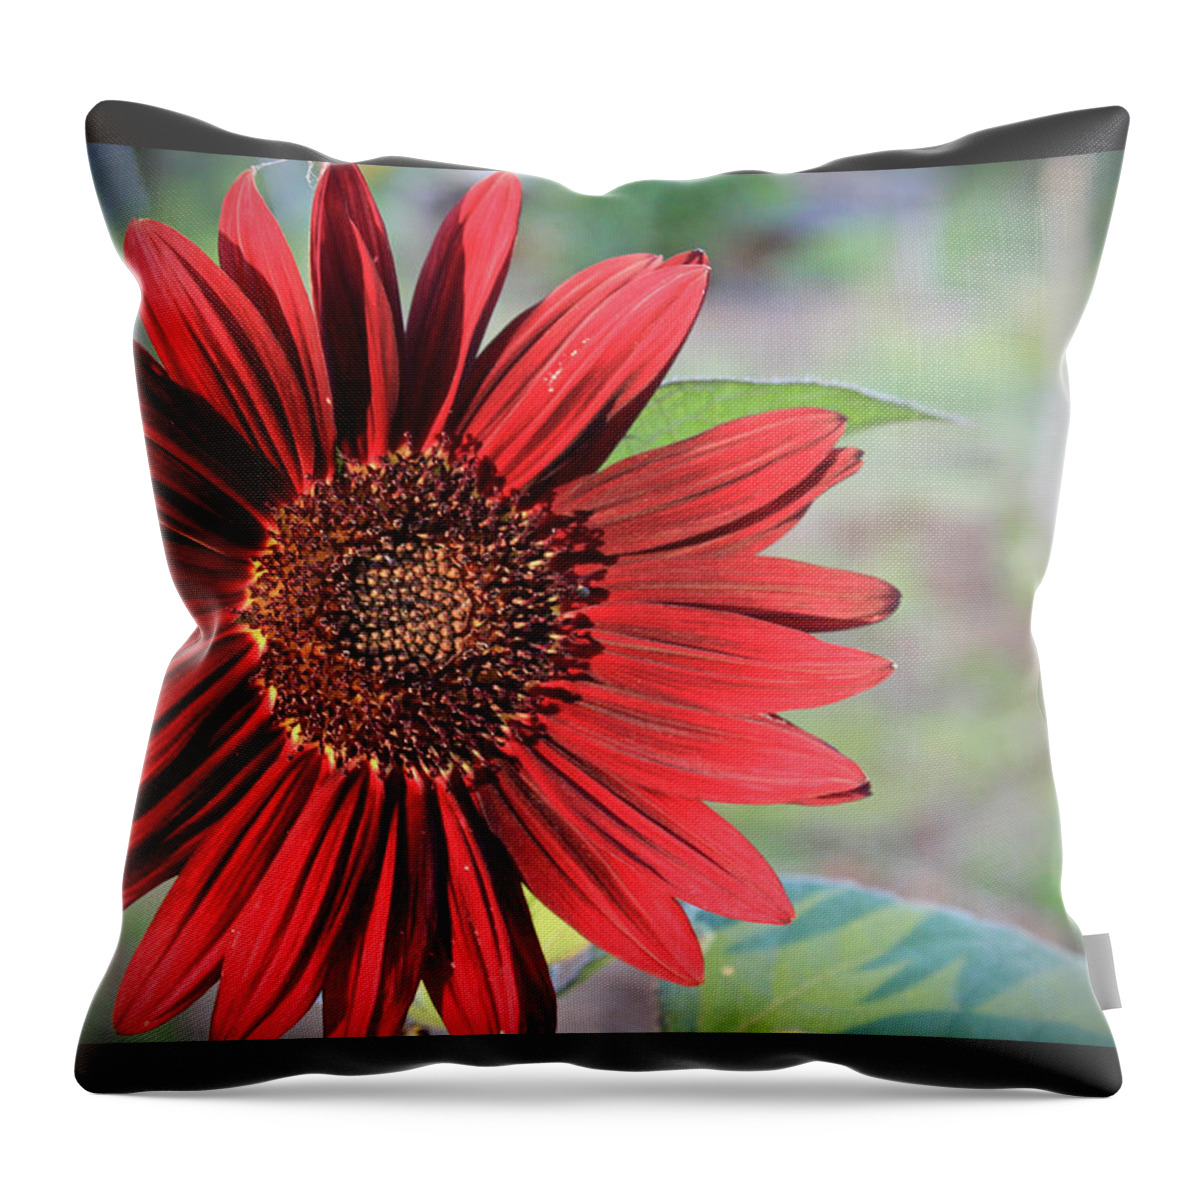 Red Throw Pillow featuring the photograph Red Sunflower by April Burton